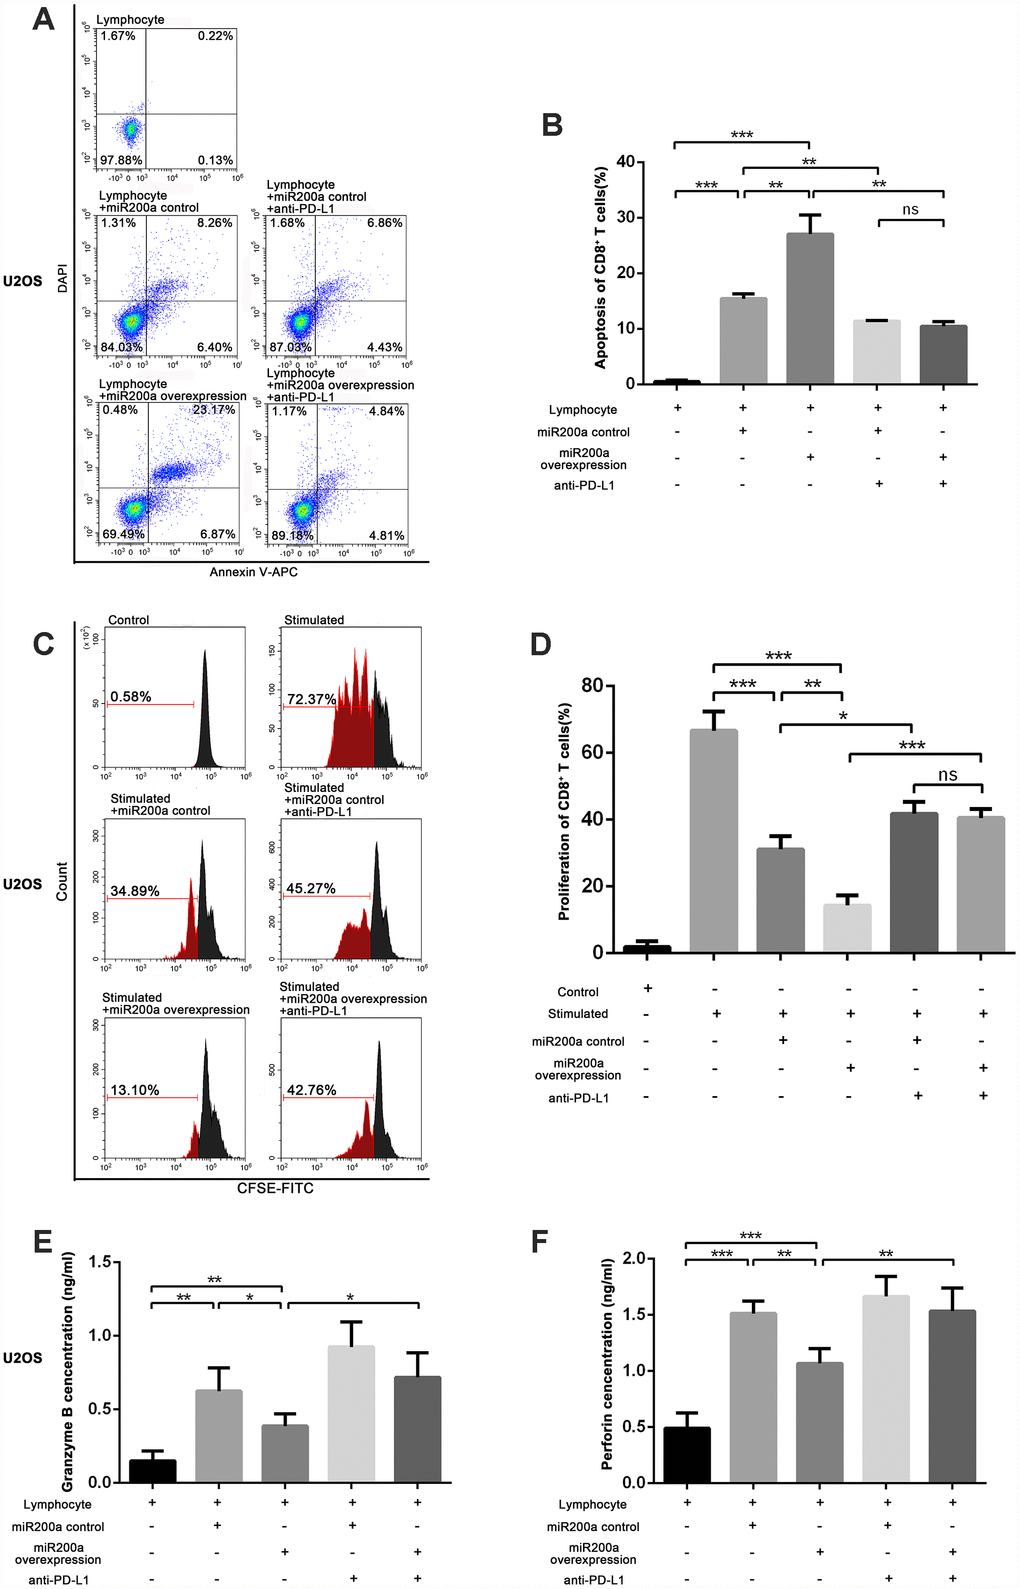 miR-200a inhibited the function of CD8+ T cells through PD-L1/PD-1 pathway in vitro. (A–B) Examine the apoptosis of CD8+ T cells after co-cultured with U2OS miR-200a control or miR-200a OE separately. (C–D) Examine the proliferation rate of CD8+ T cells after co-cultured with U2OS miR-200a control or miR-200a OE separately. (E–F) Enzyme-Linked ImmunoSorbent Assay (ELISA) of the secretion of granzyme B and perforin. *P